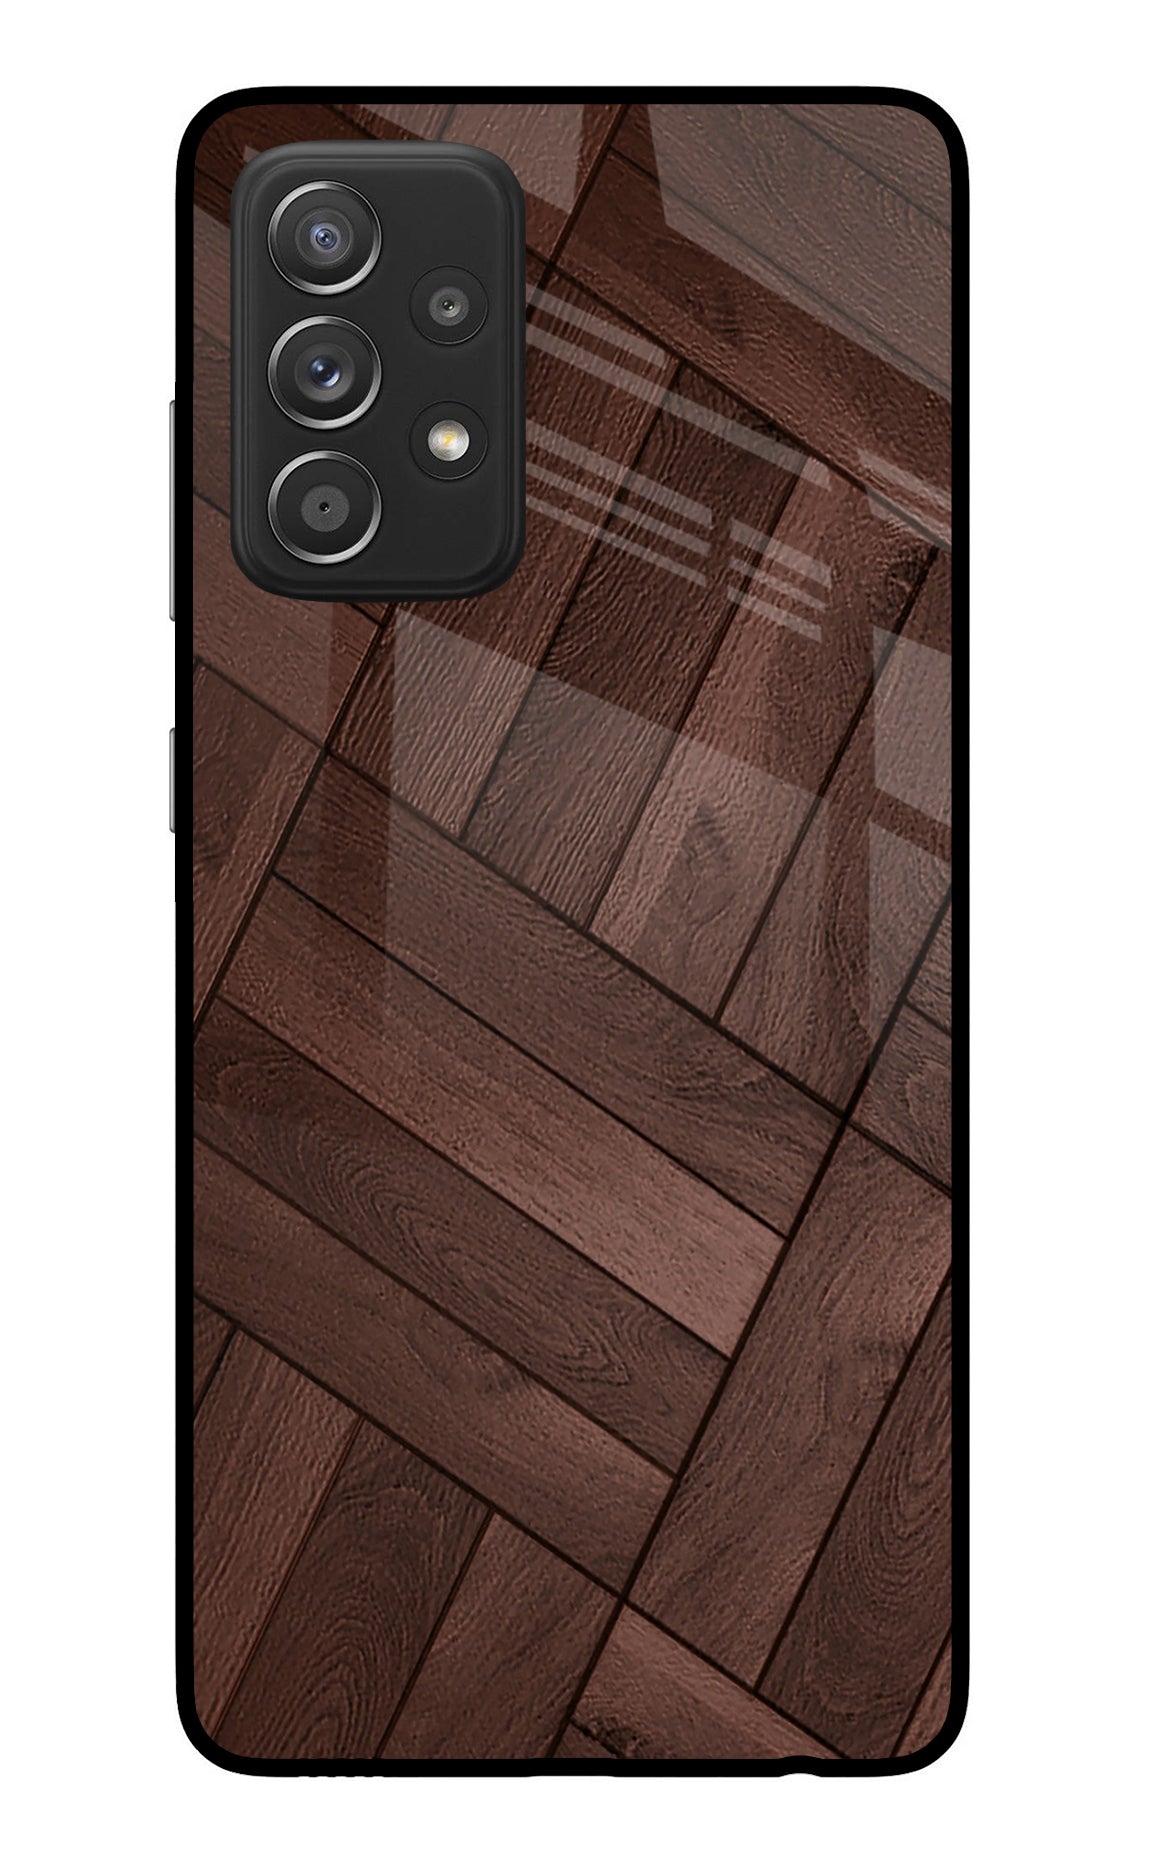 Wooden Texture Design Samsung A52/A52s 5G Back Cover